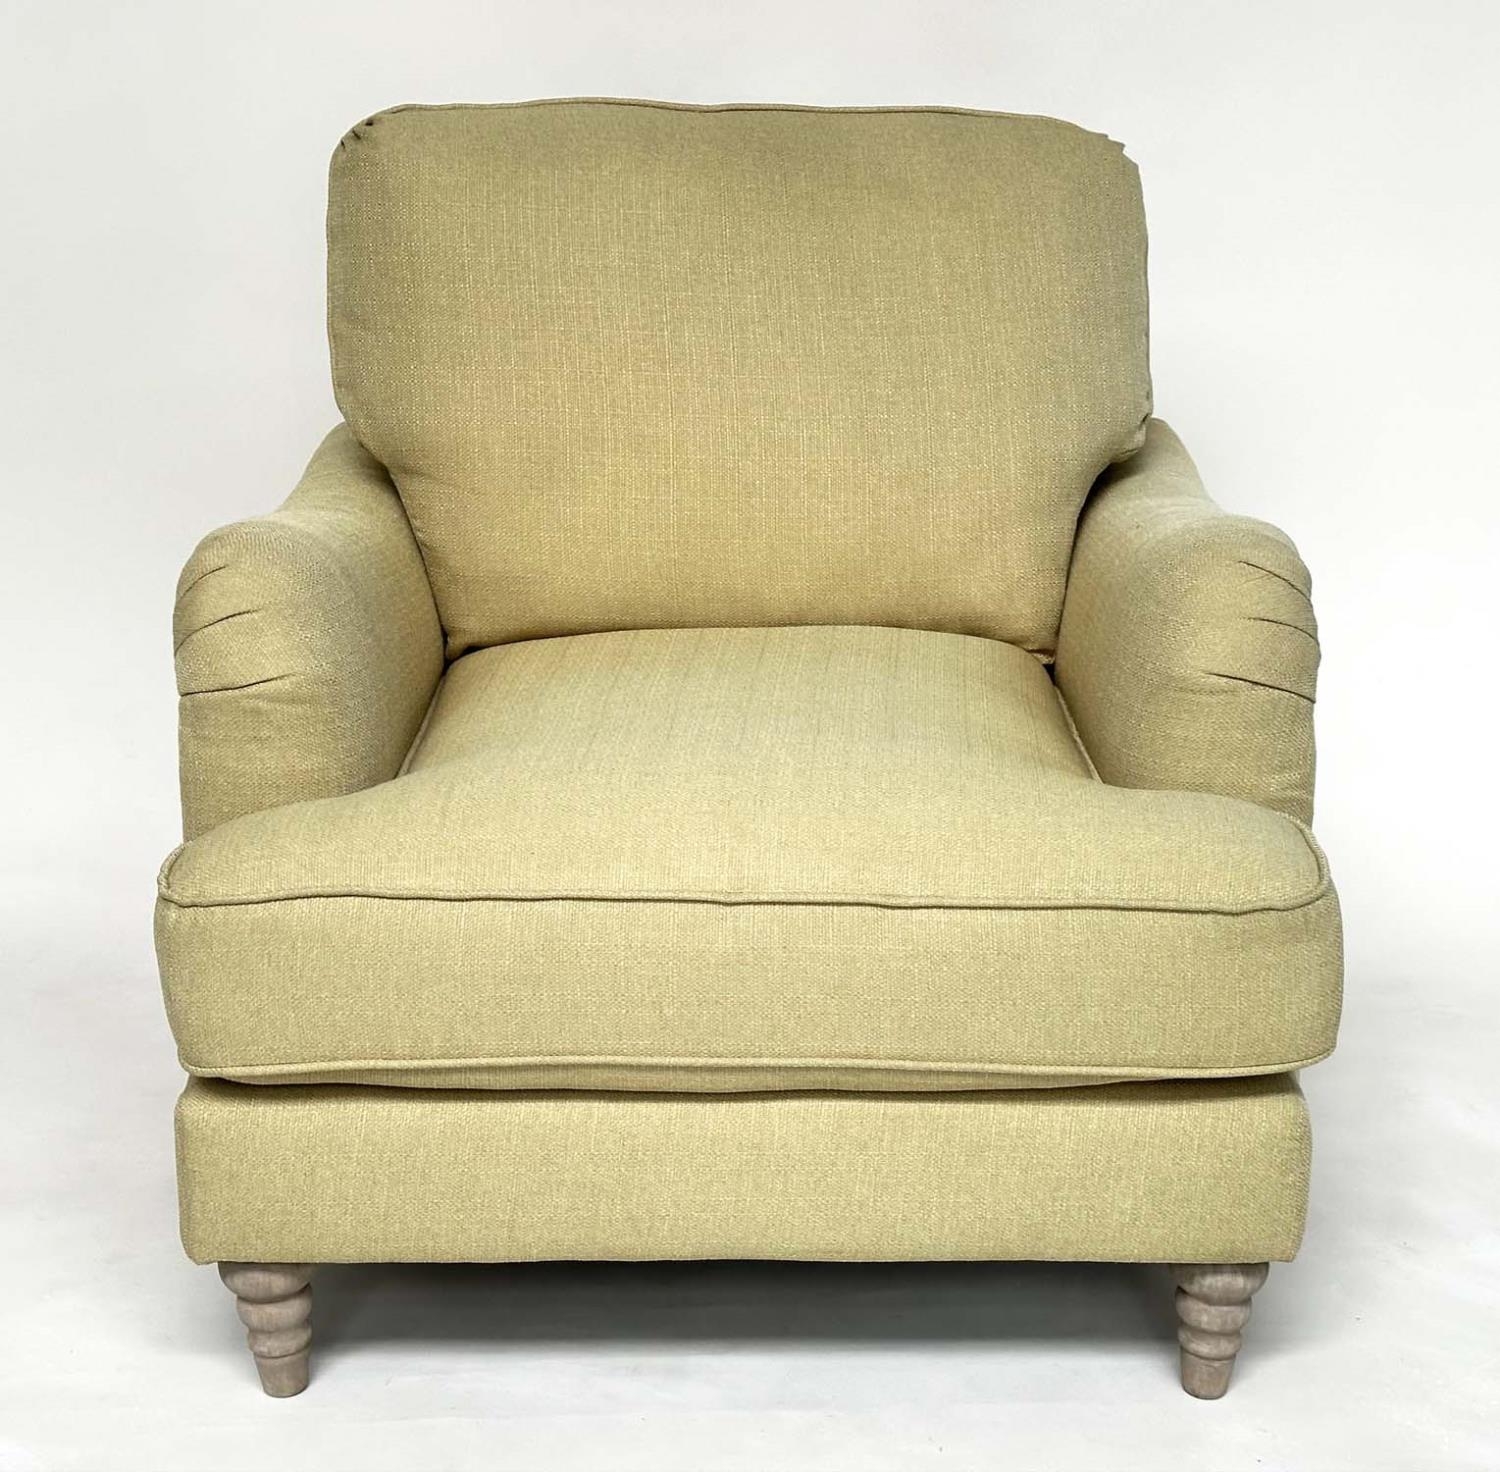 COUNTRY HOUSE ARMCHAIR, Howard and Son style Bridgewater model inspired with primrose yellow slub - Image 4 of 8